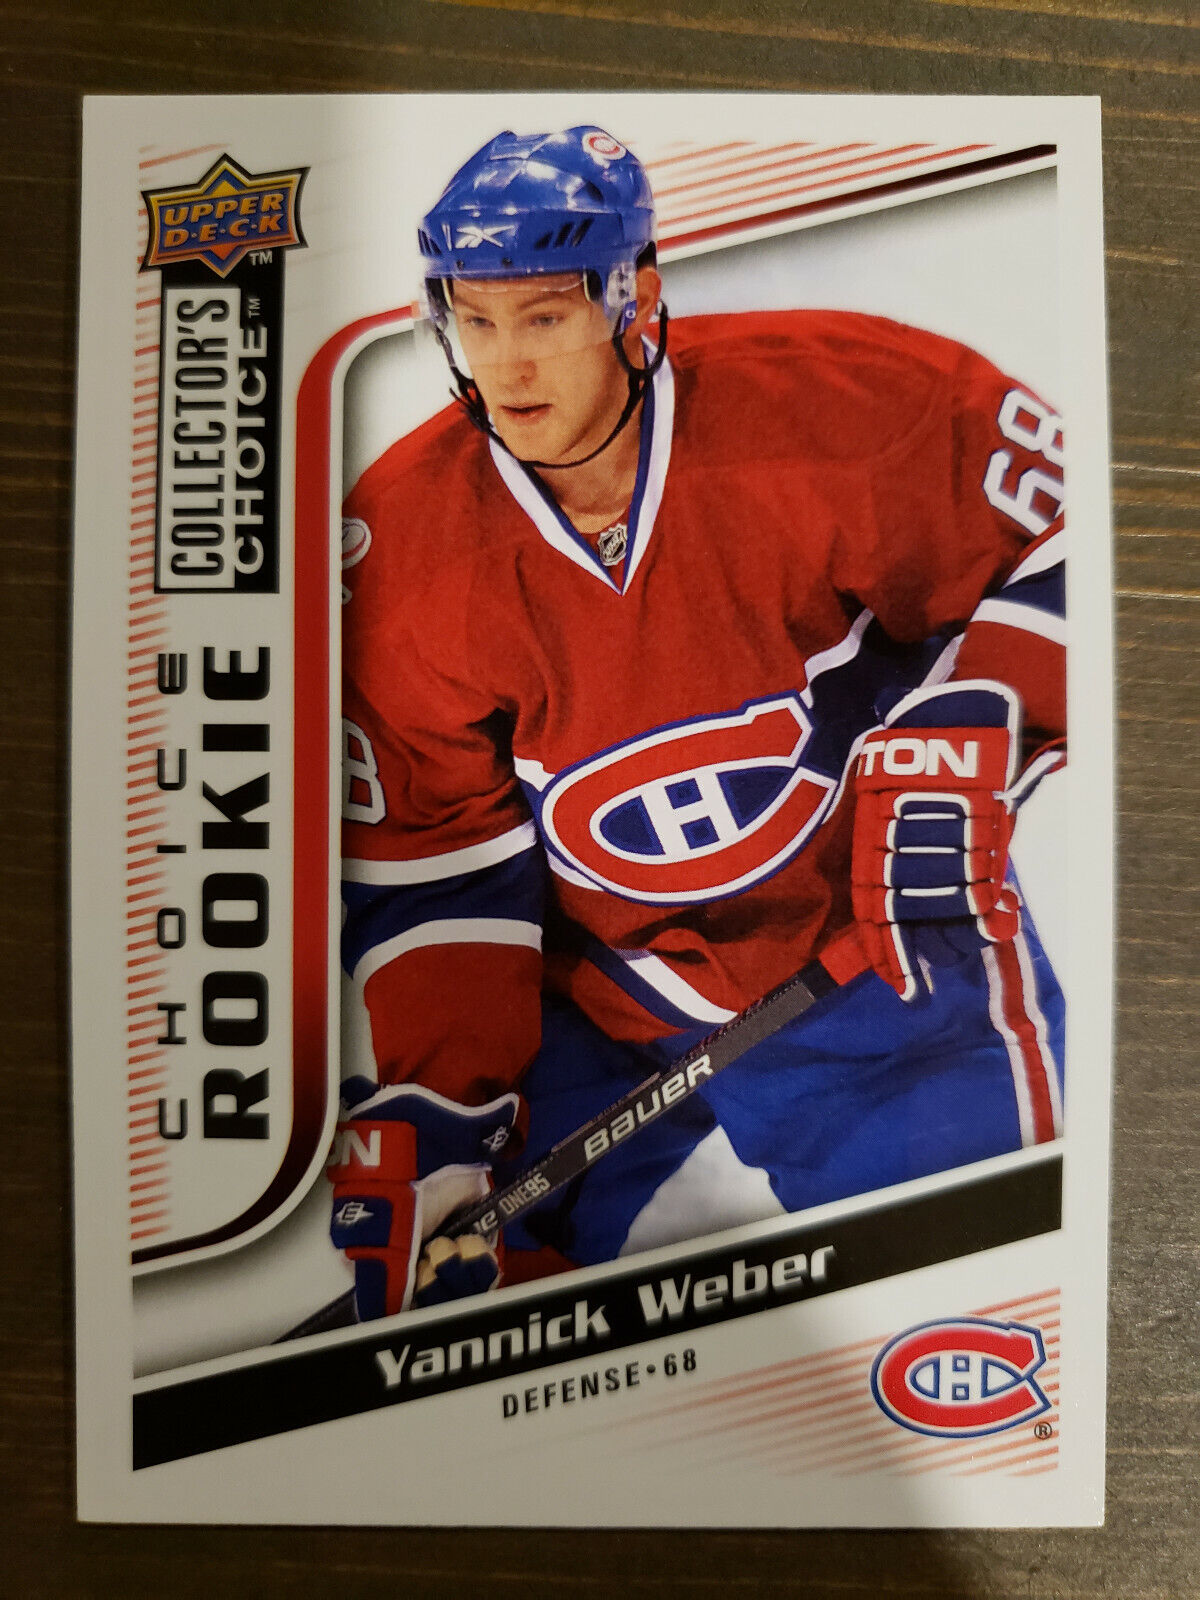 2009-10 Upper Deck Collector's Choice Yannick Weber Hockey Rookie RC Card #263. rookie card picture